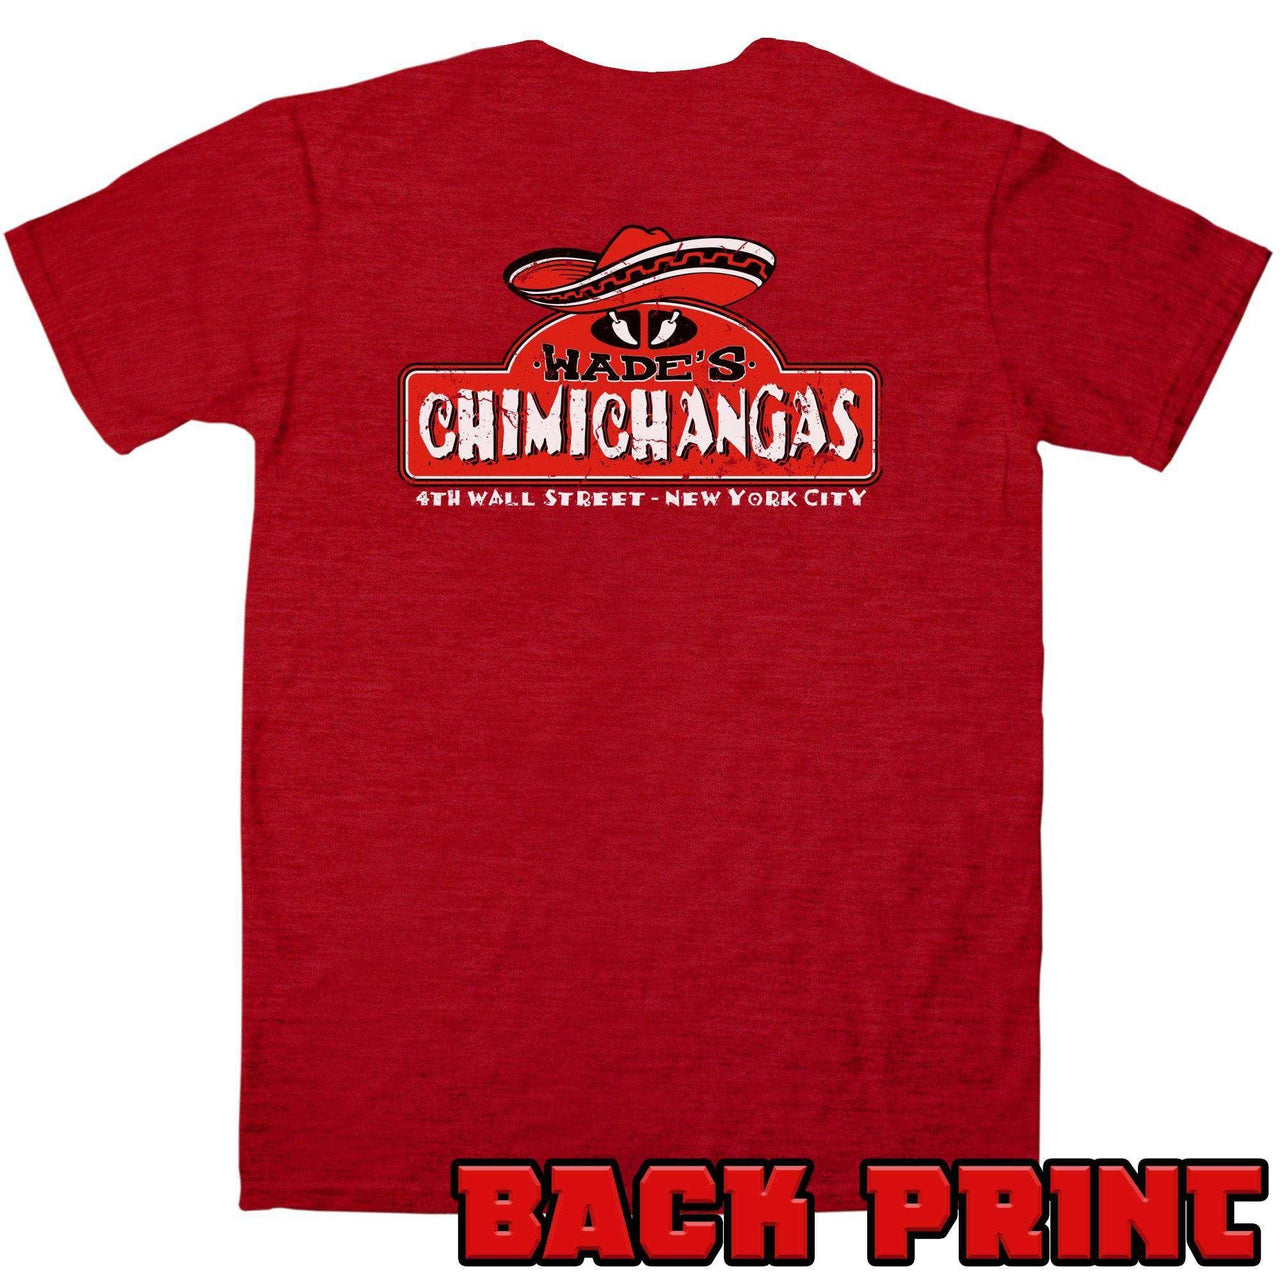 Wades Chimichangas with Back Print Unisex T-Shirt For Men And Women 8Ball